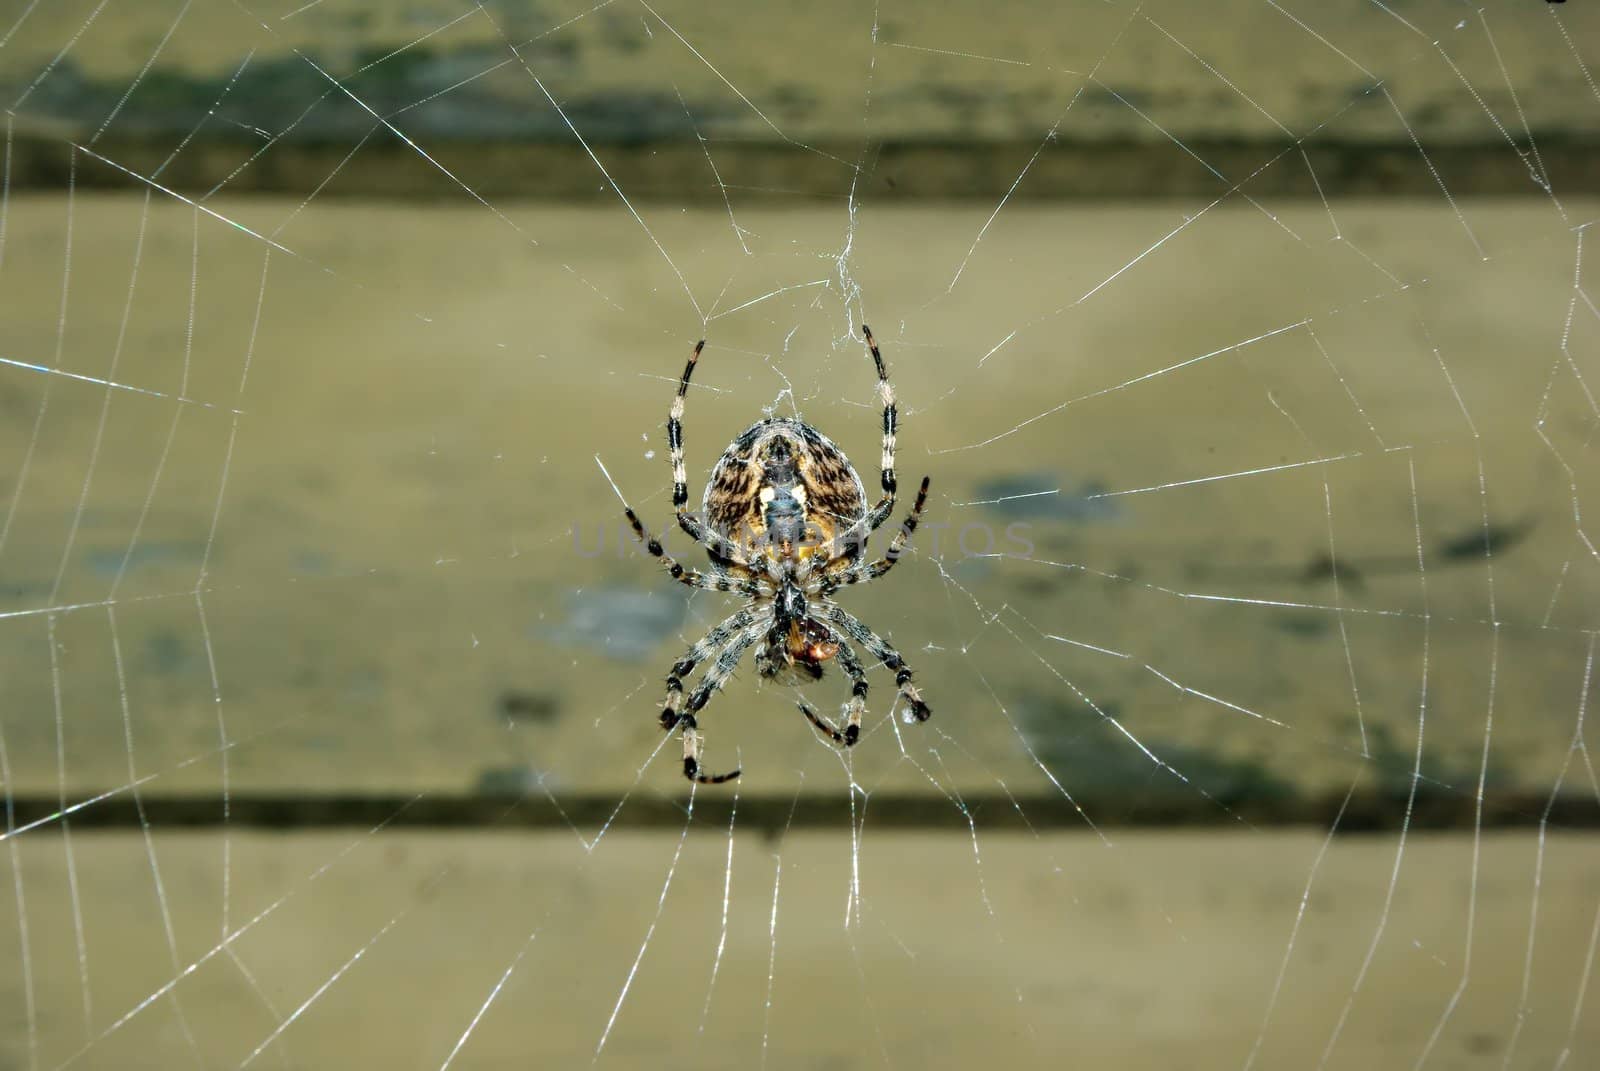 Spider on her web by Vitamin